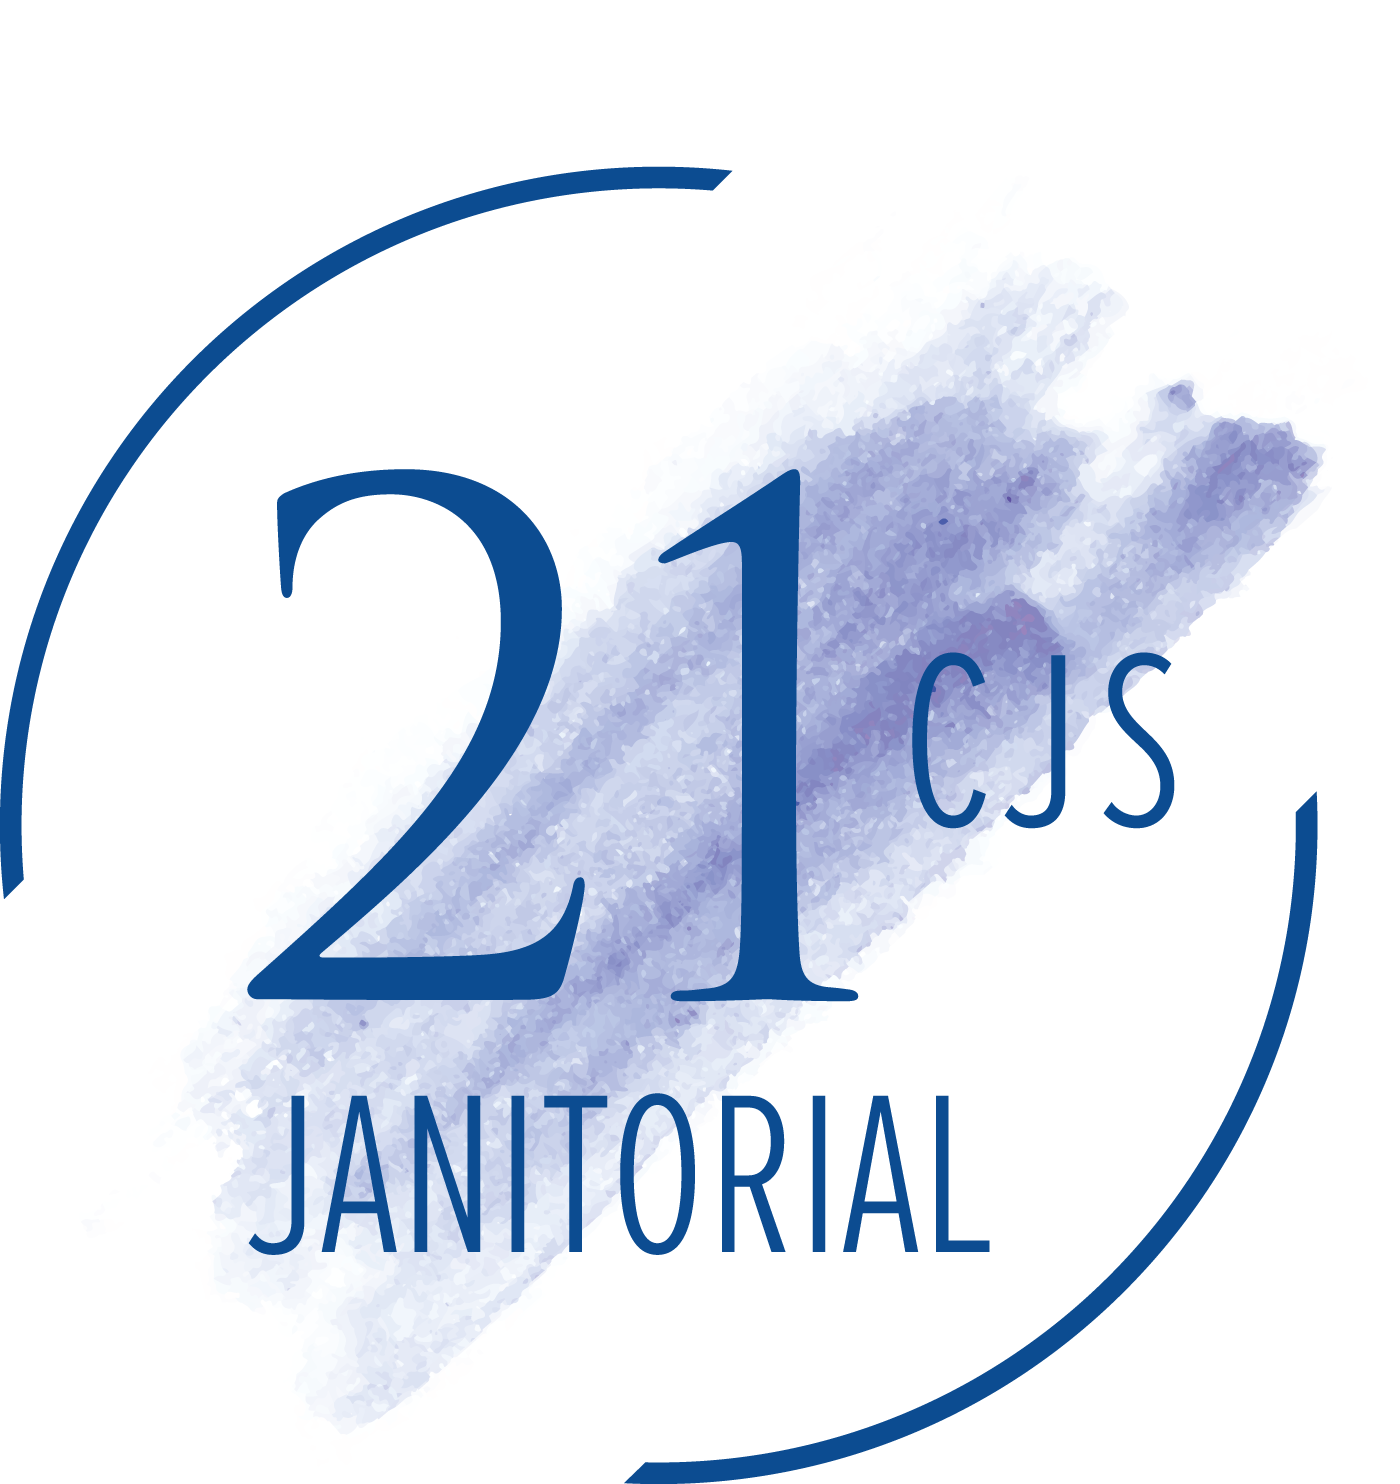 21st Century Janitorial Services